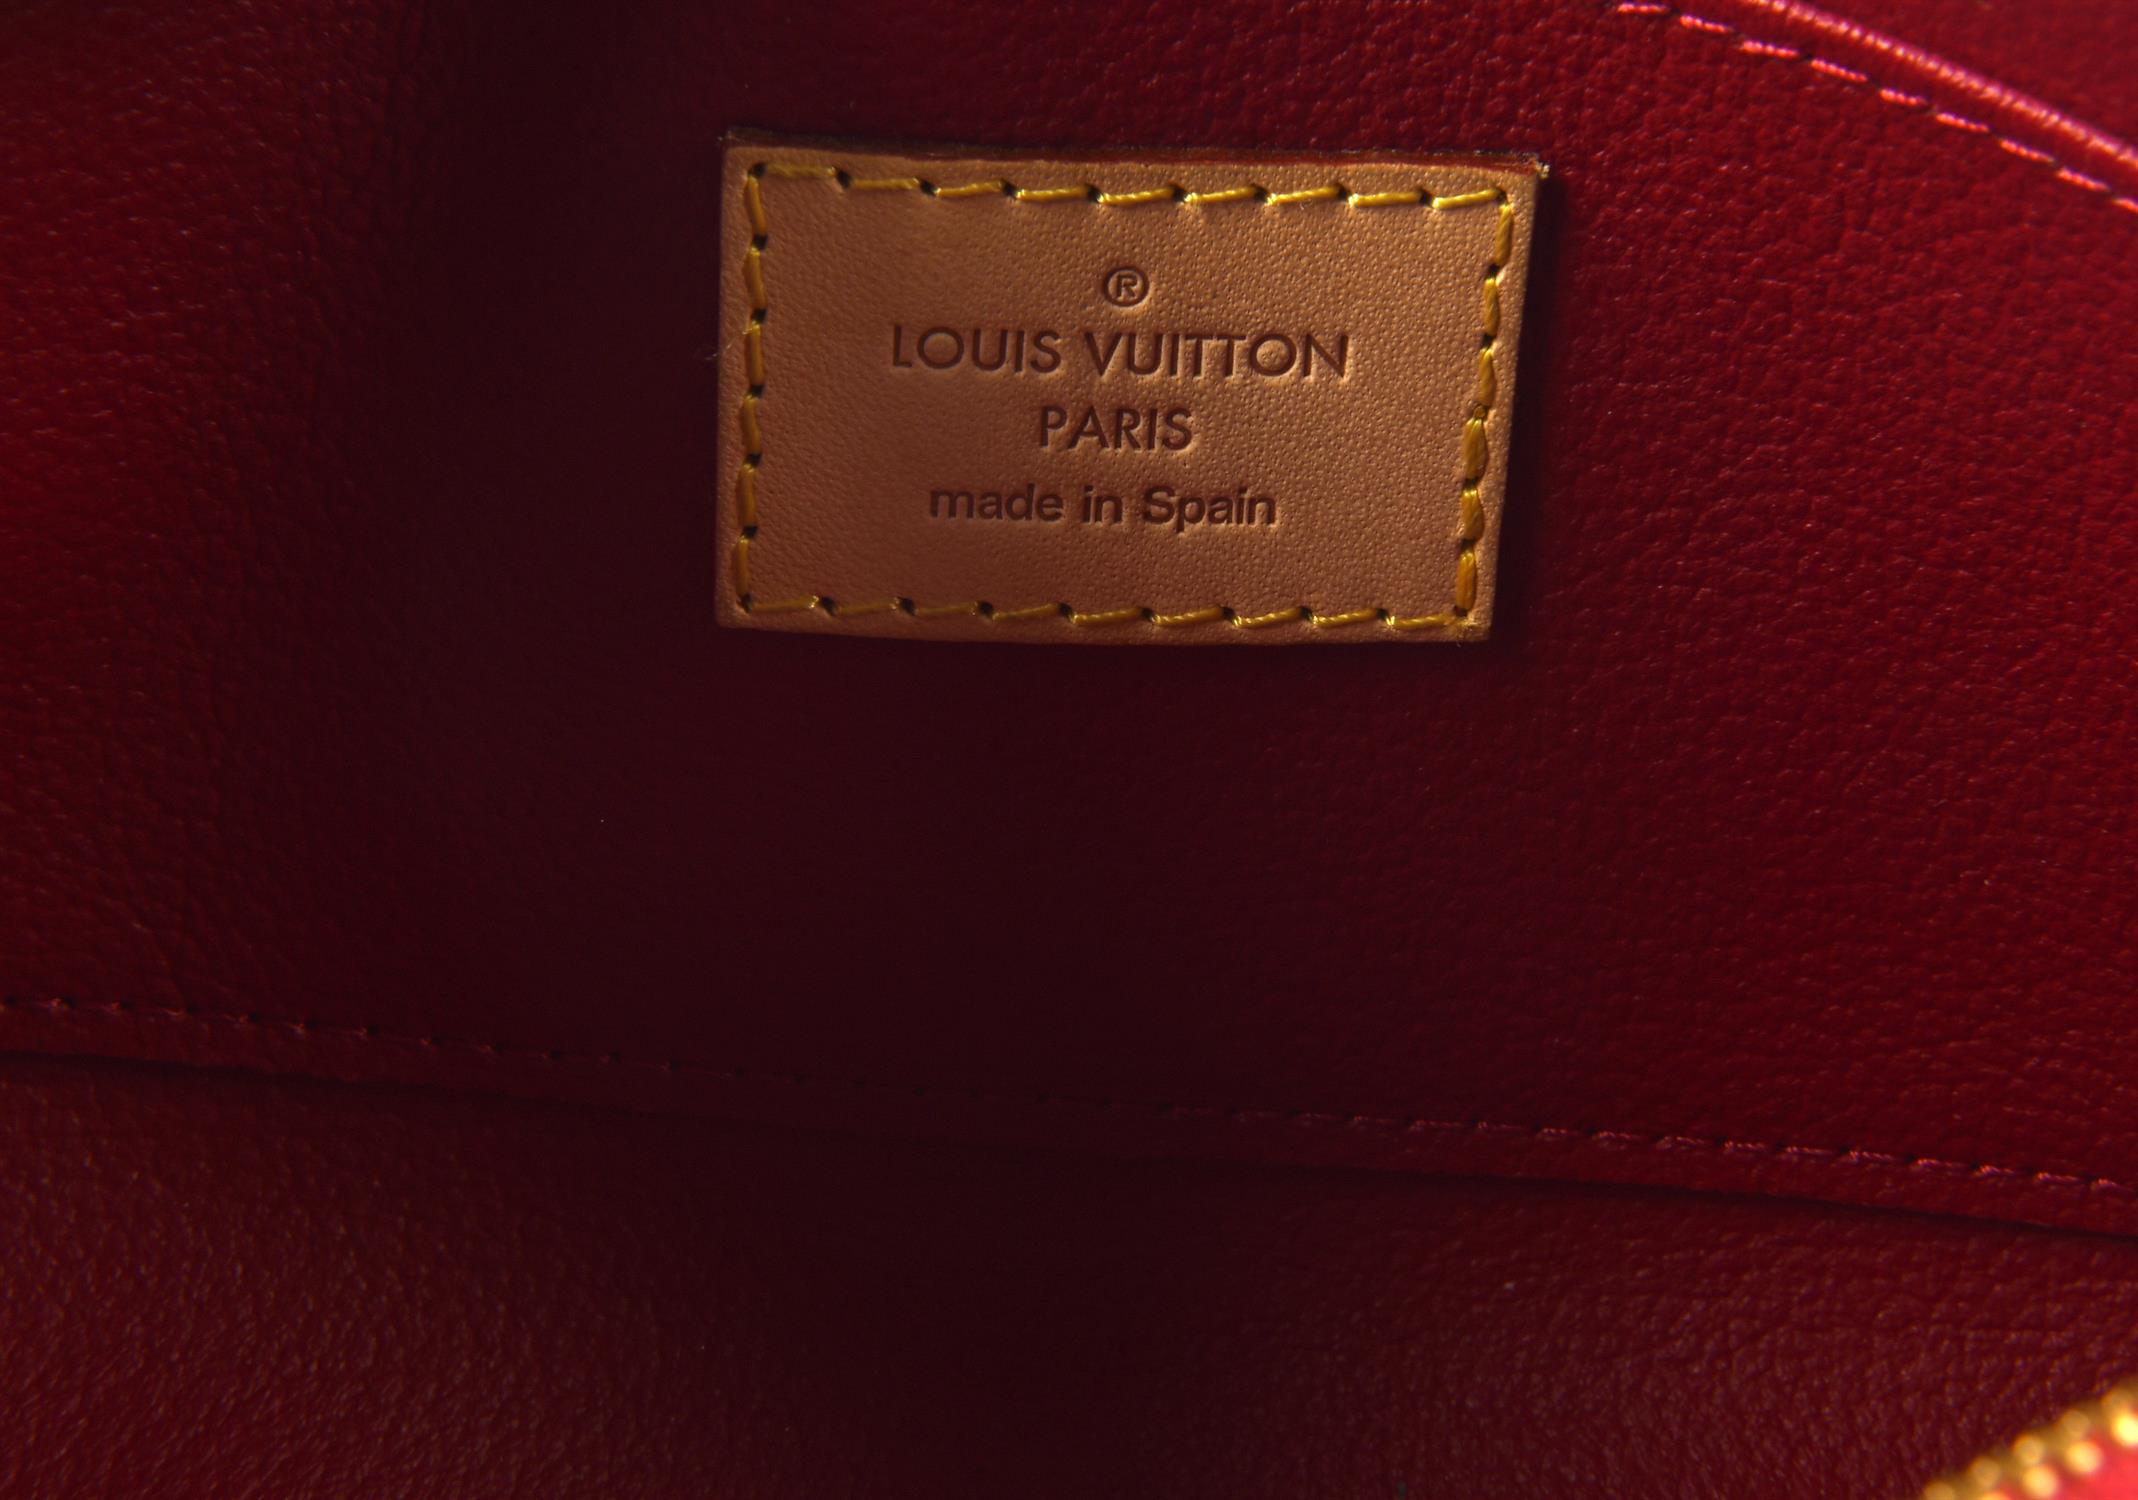 LOUIS VUITTON lipstick red varnished Vernis calf leather make-up bag with dust cloth (17cm x 13cm x - Image 6 of 6